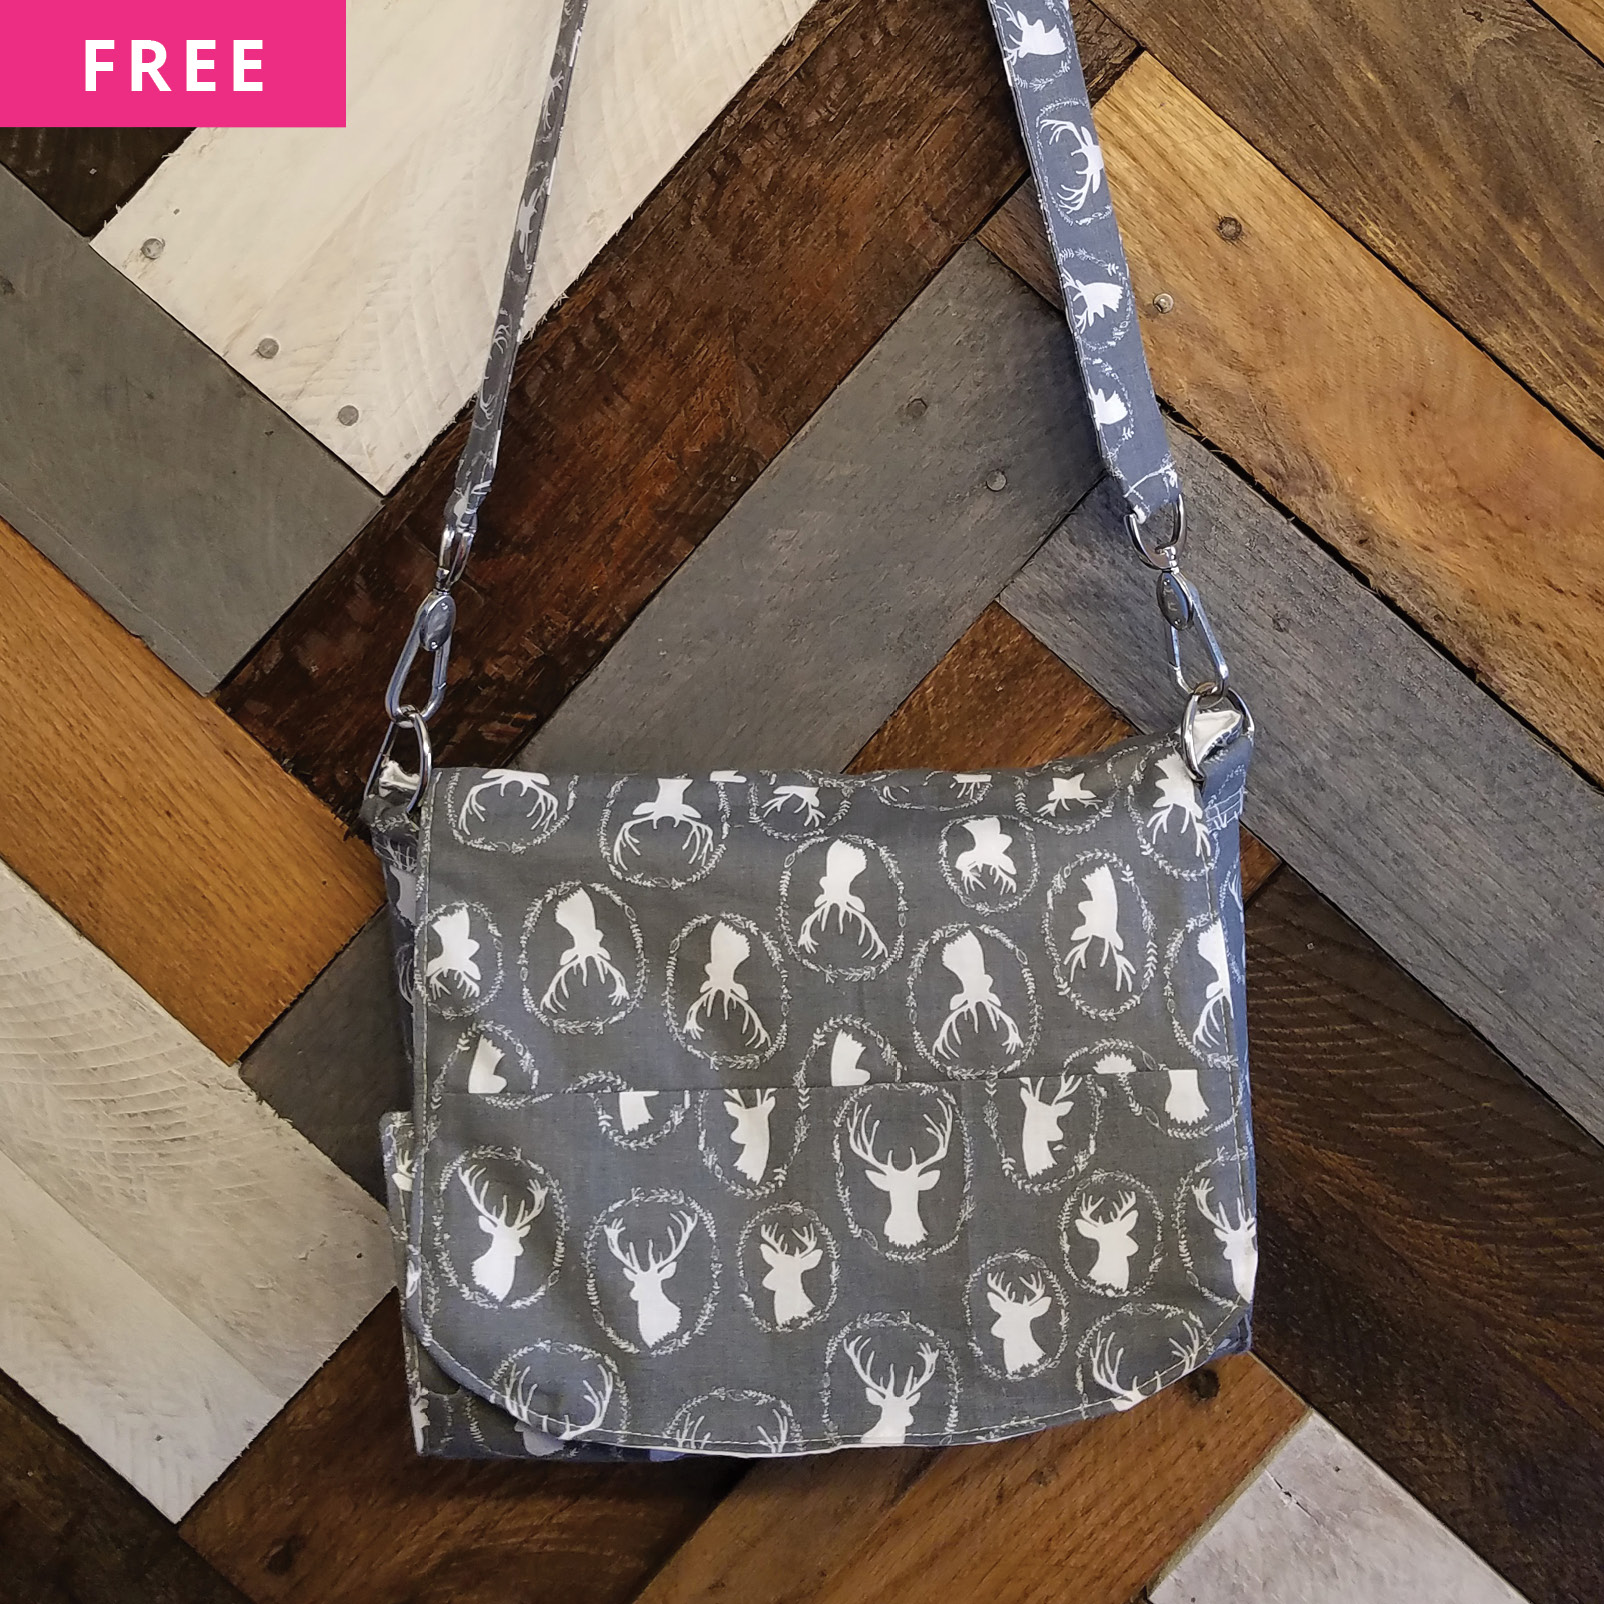 Free Sewing Pattern - Wallet Front Purse